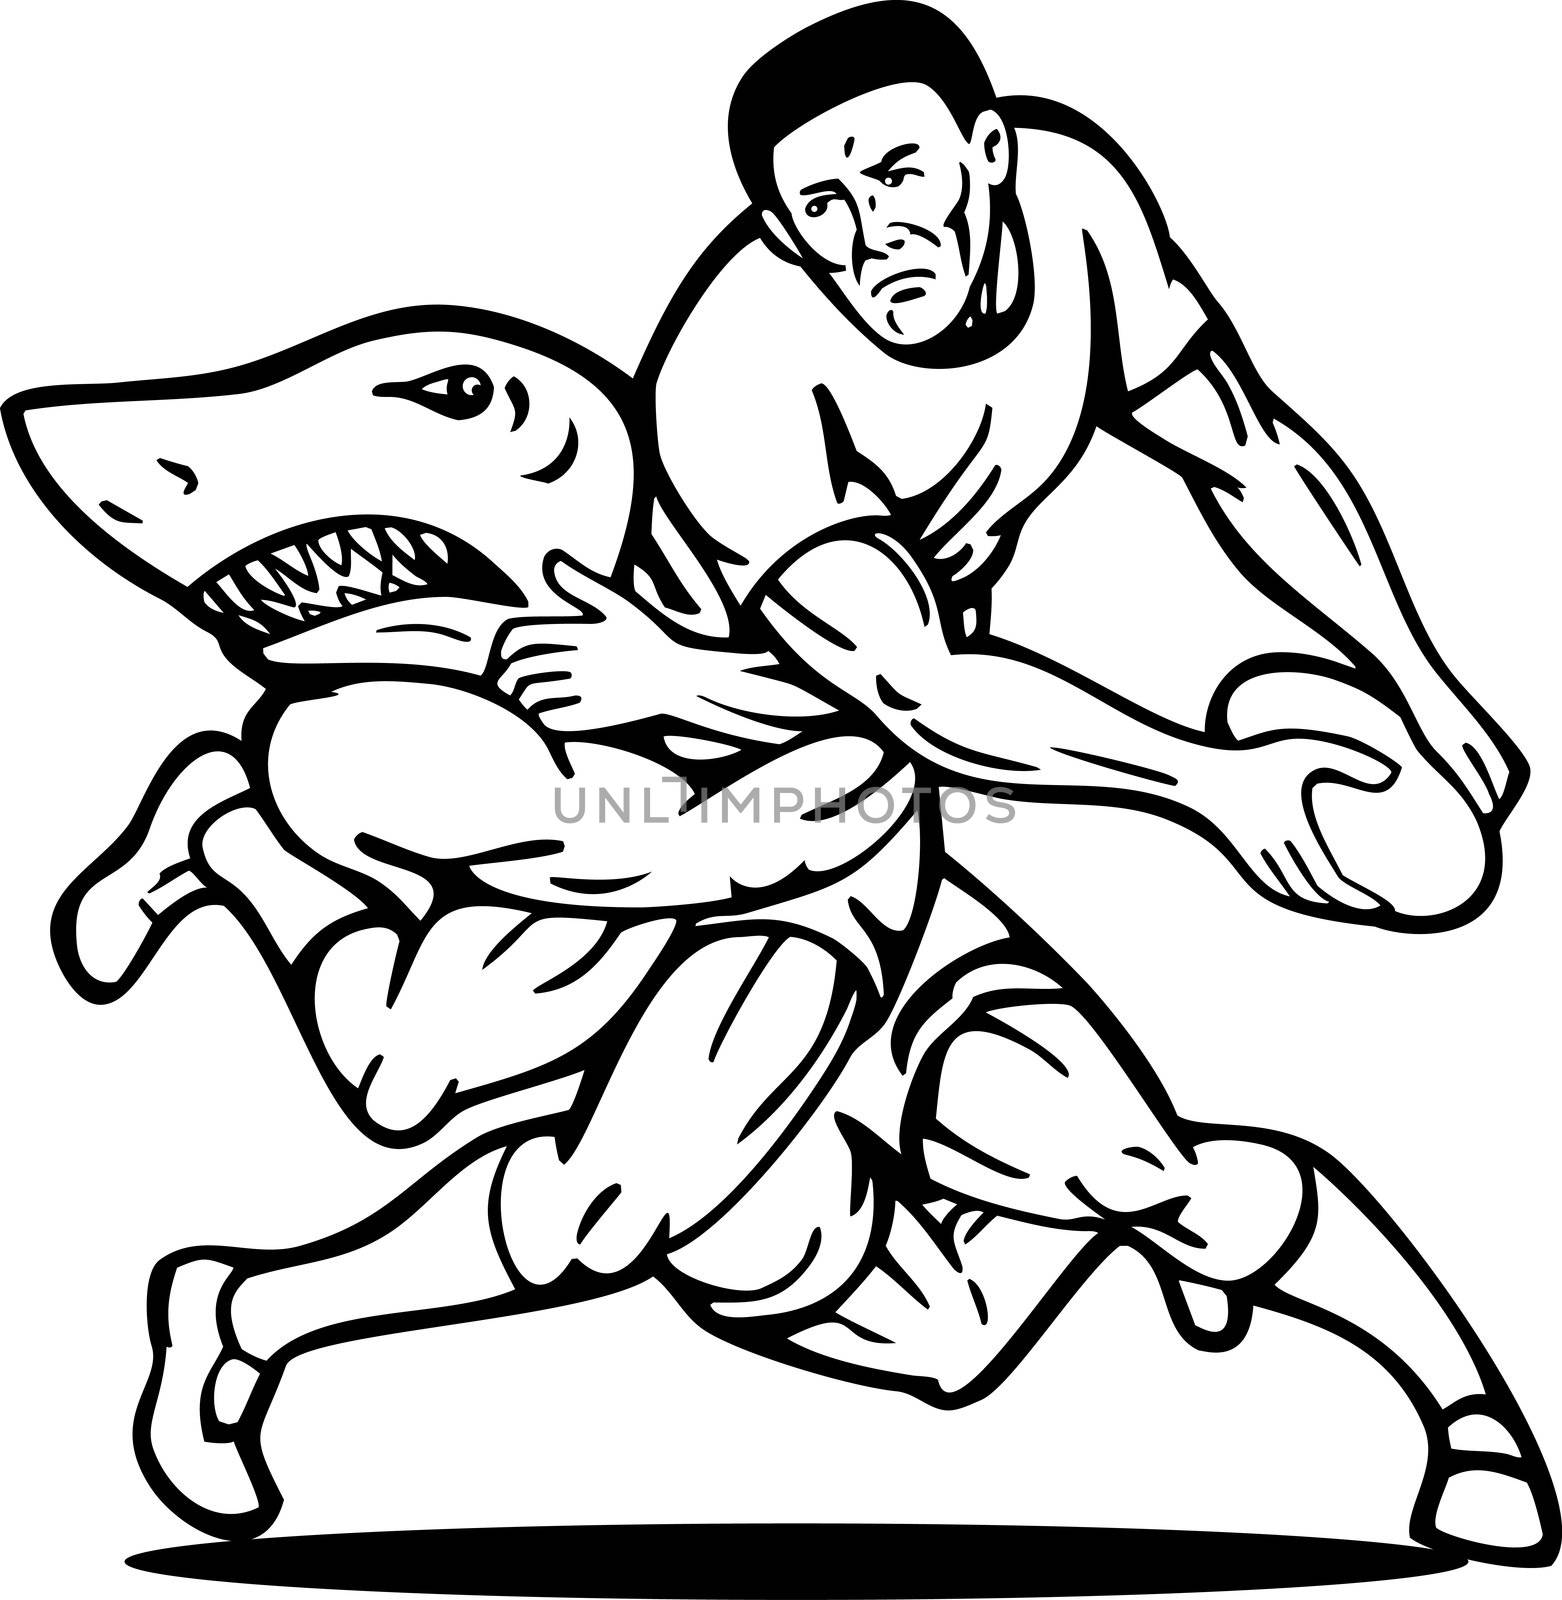 illustration of a Rugby player about to passing ball tackled attacked by shark done in black and white.